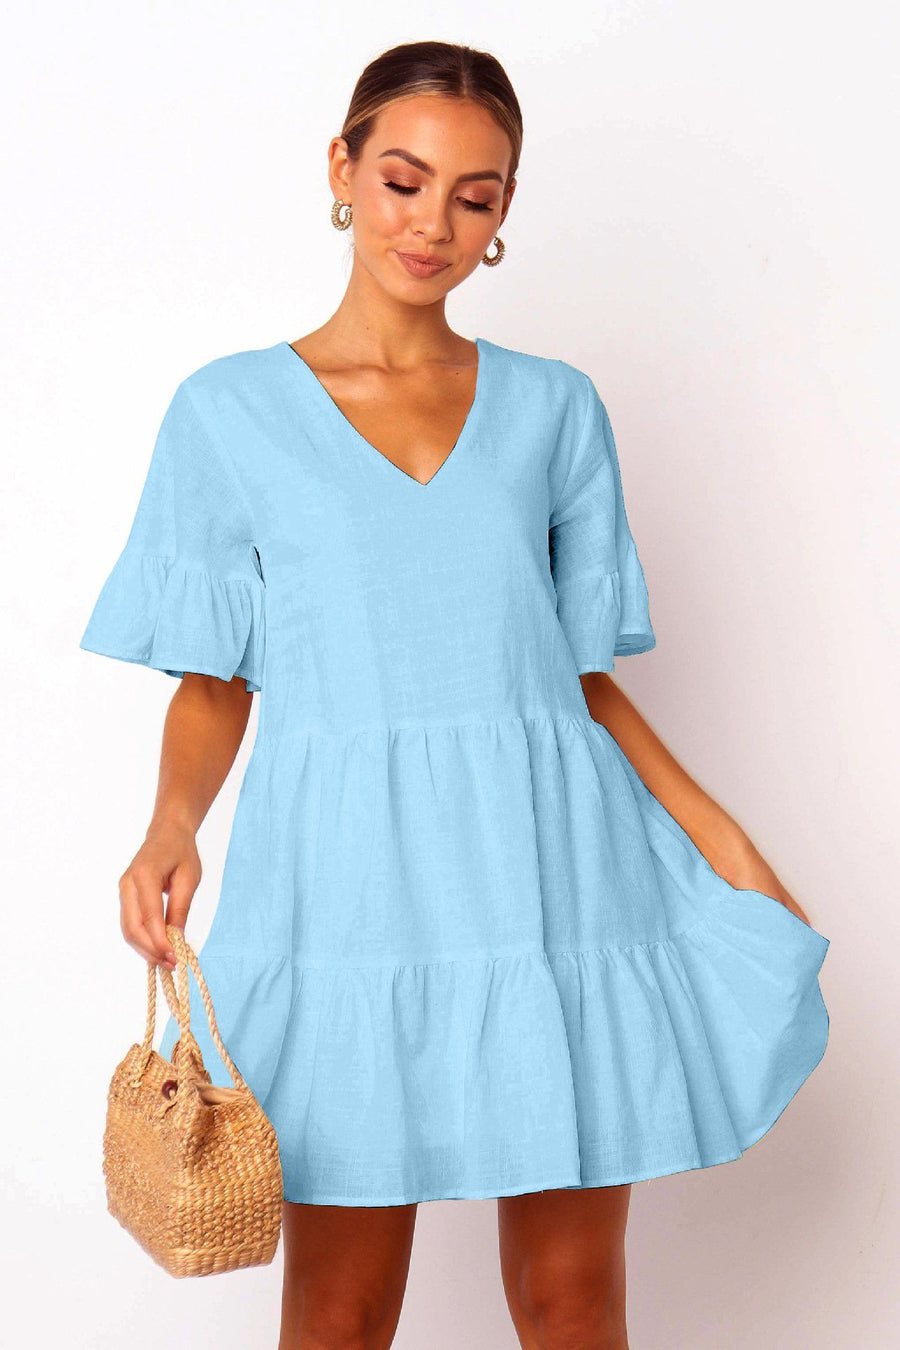 One Piece Casual Short Flared Sleeves Swing Mini Dress